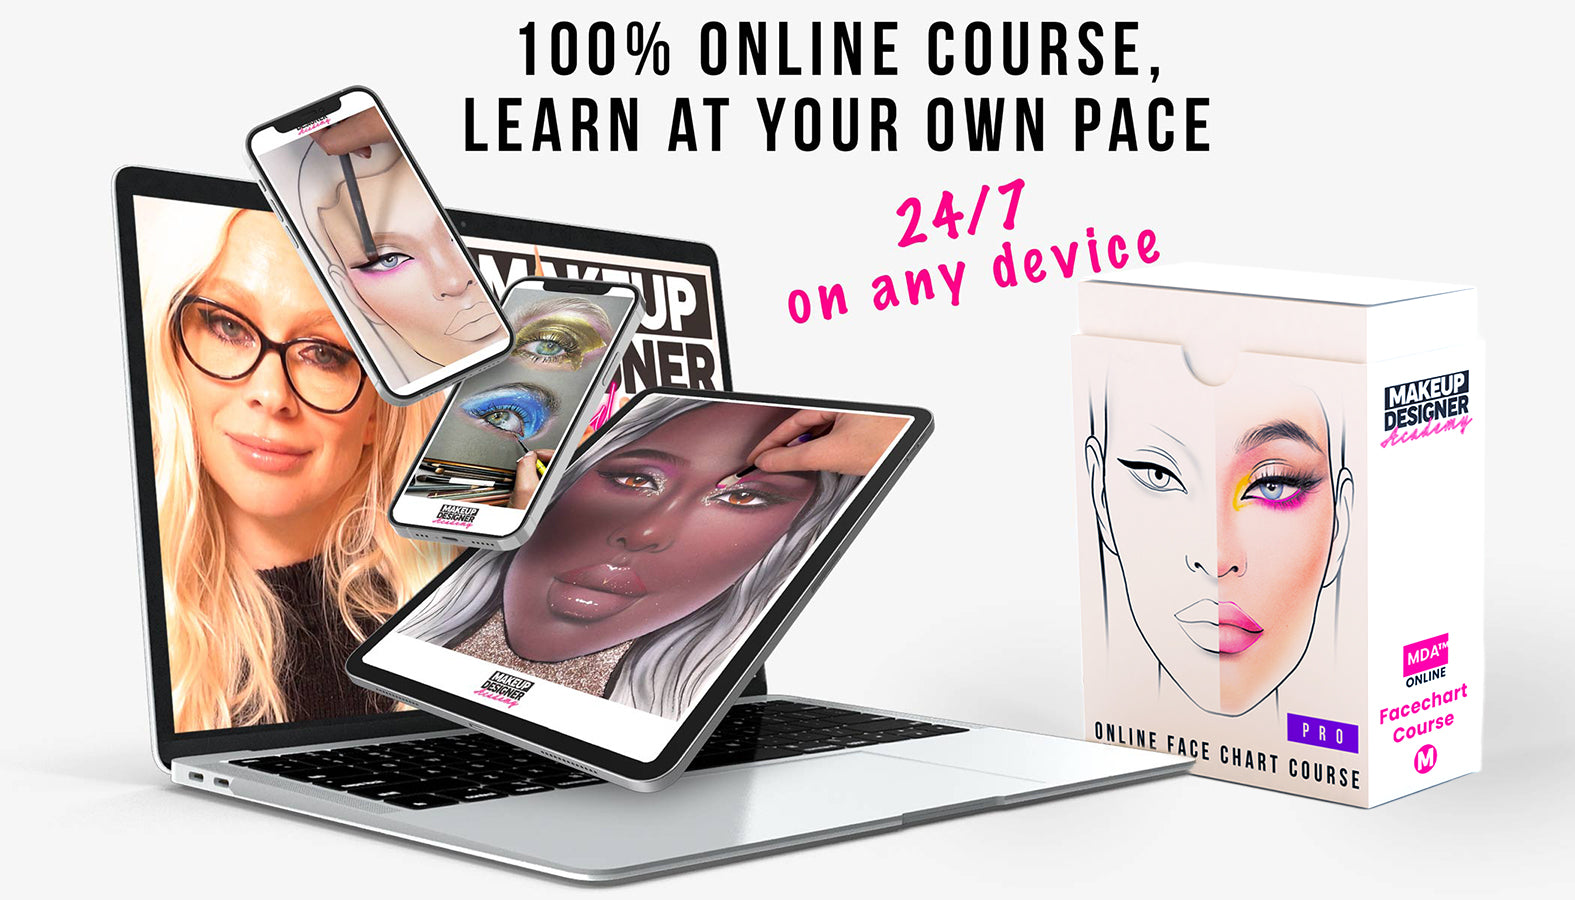 multiple devices showing screenshots of the makeup designer course by liza kondrevich and a product package of makeup designer academy's online face chart makeup course